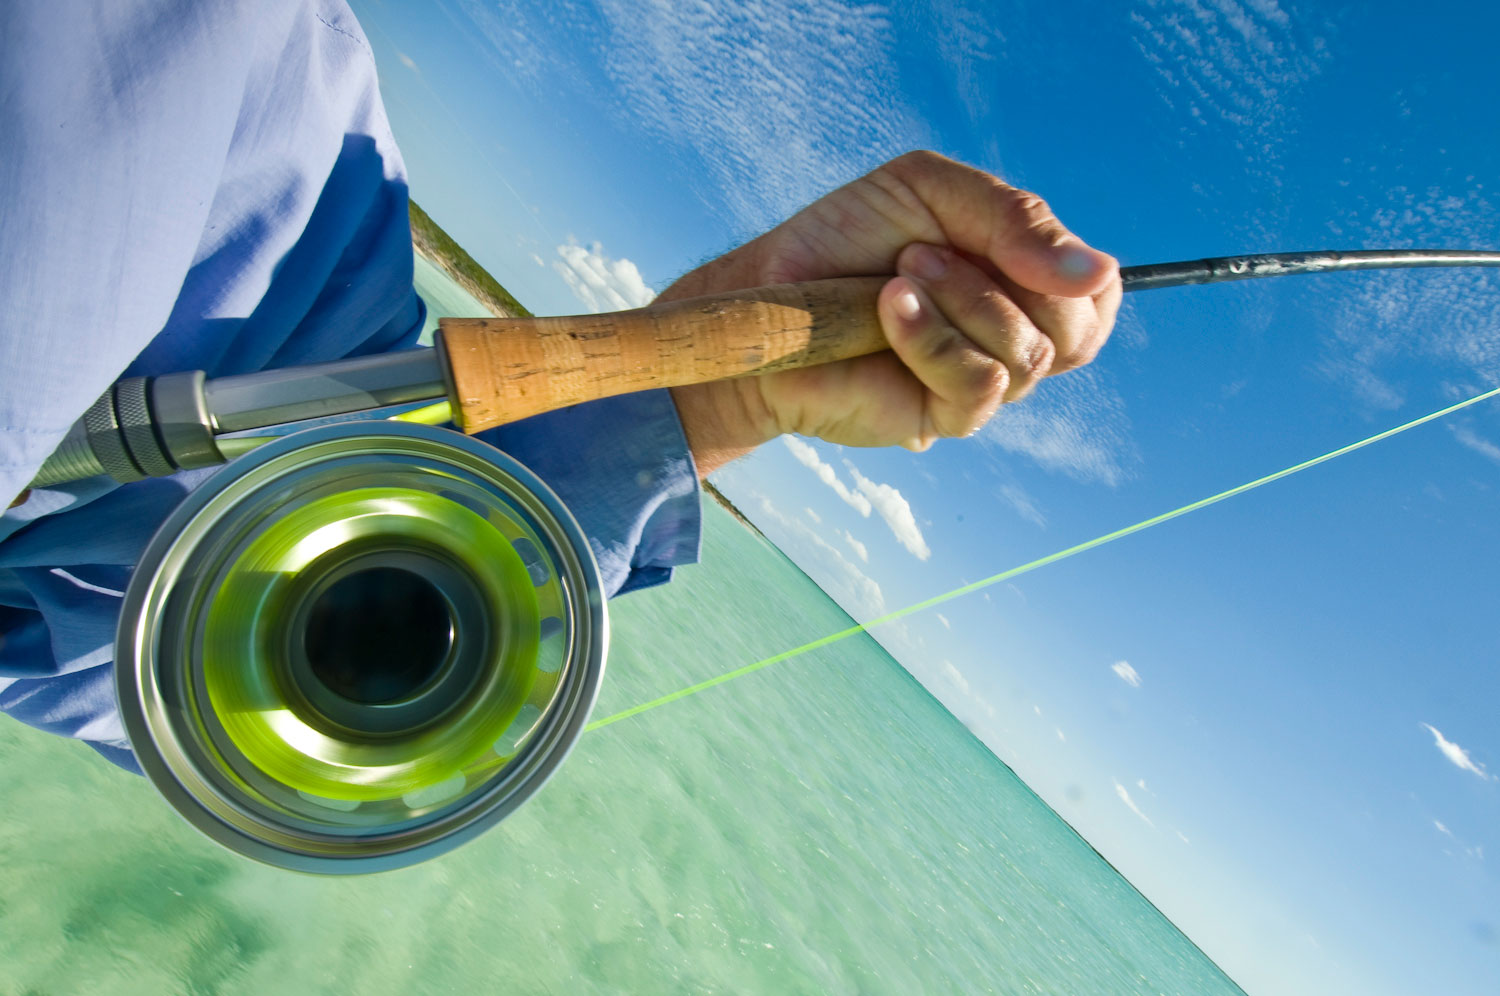 Fish the Bahamas with the Boys From G&G! - Fly Fishing, Gink and Gasoline, How to Fly Fish, Trout Fishing, Fly Tying